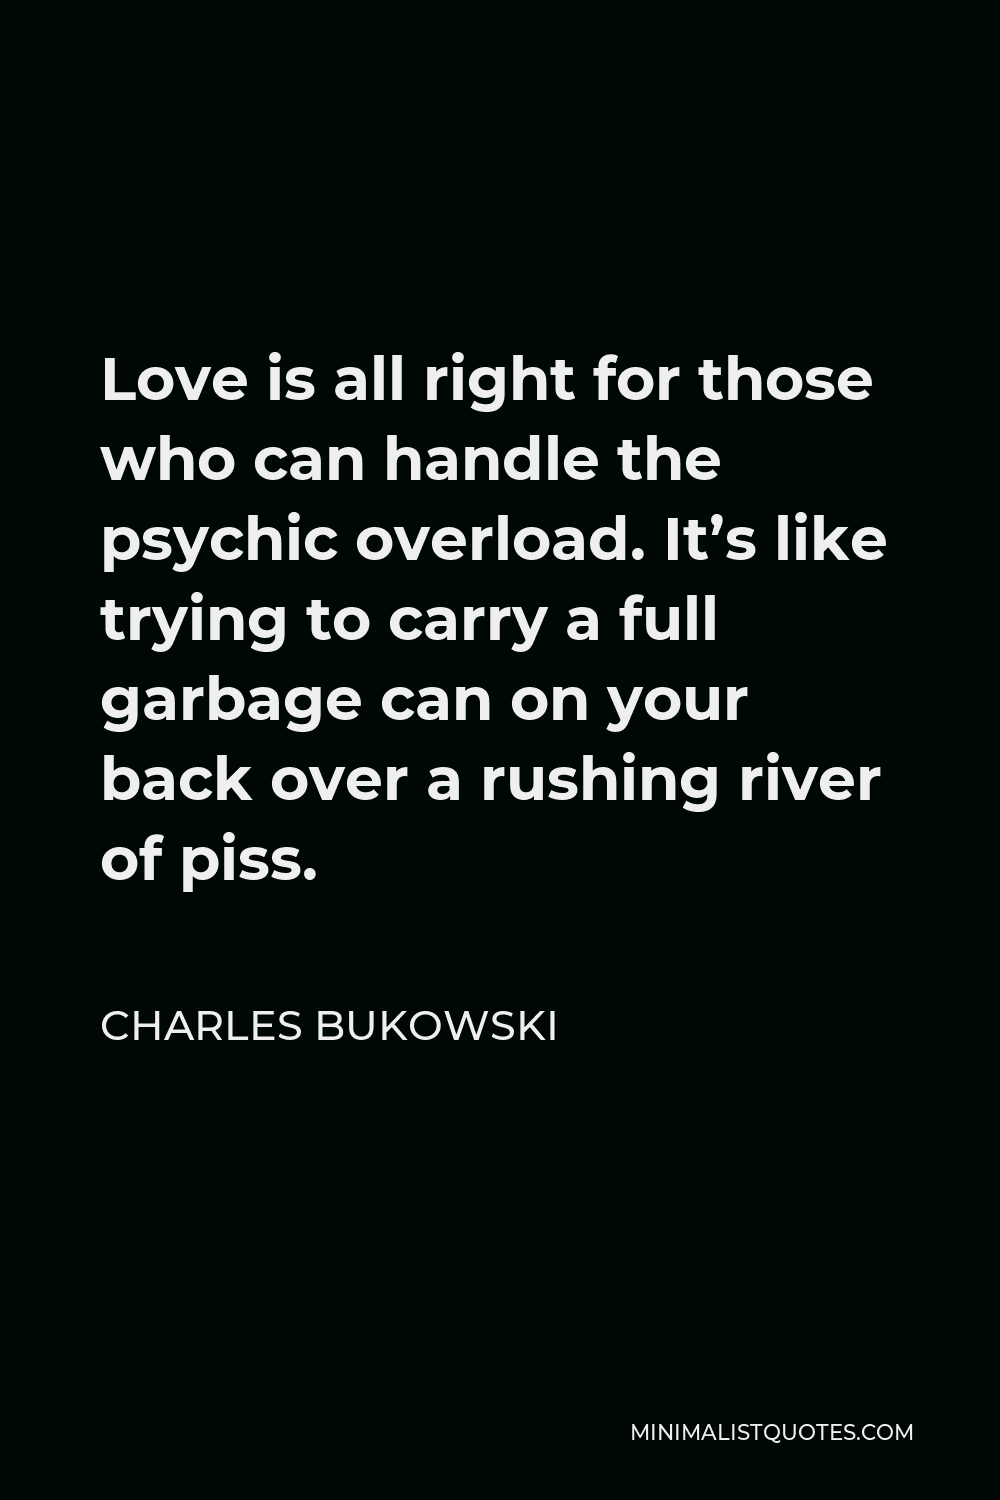 Charles Bukowski Quote - Love is all right for those who can handle the psychic overload. It’s like trying to carry a full garbage can on your back over a rushing river of piss.